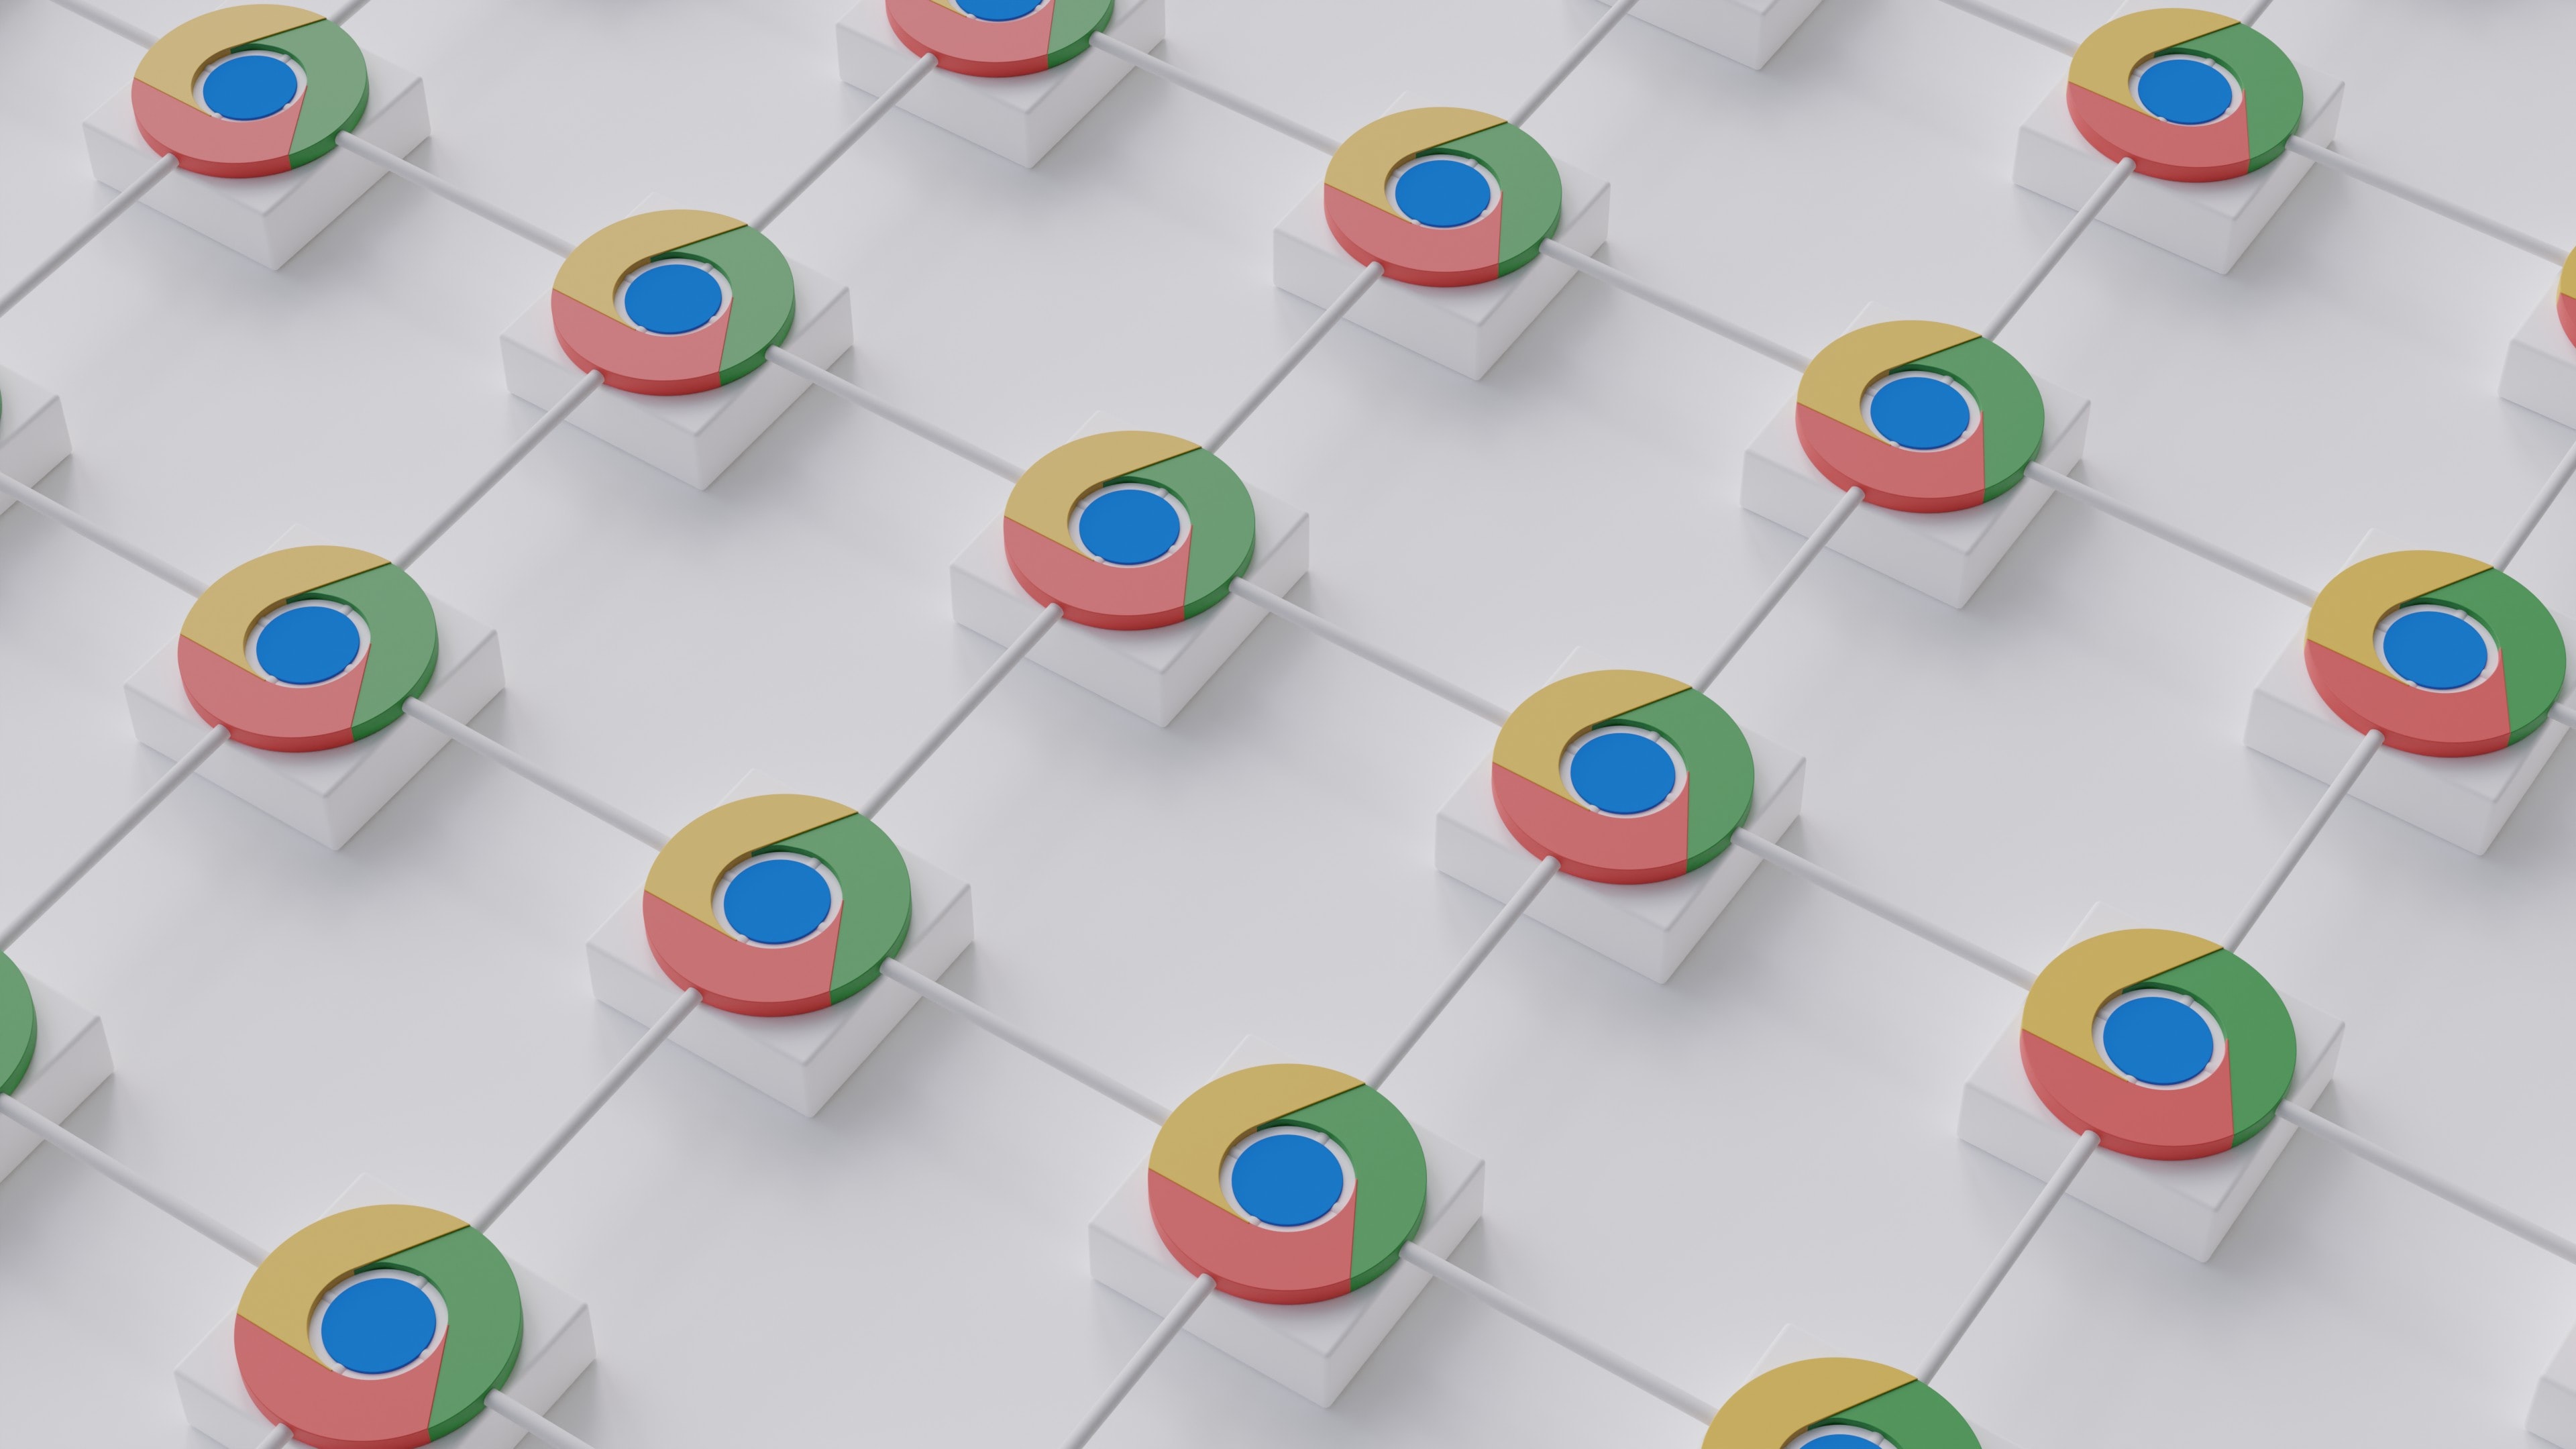 The browser announced several new features to protect the privacy of users.